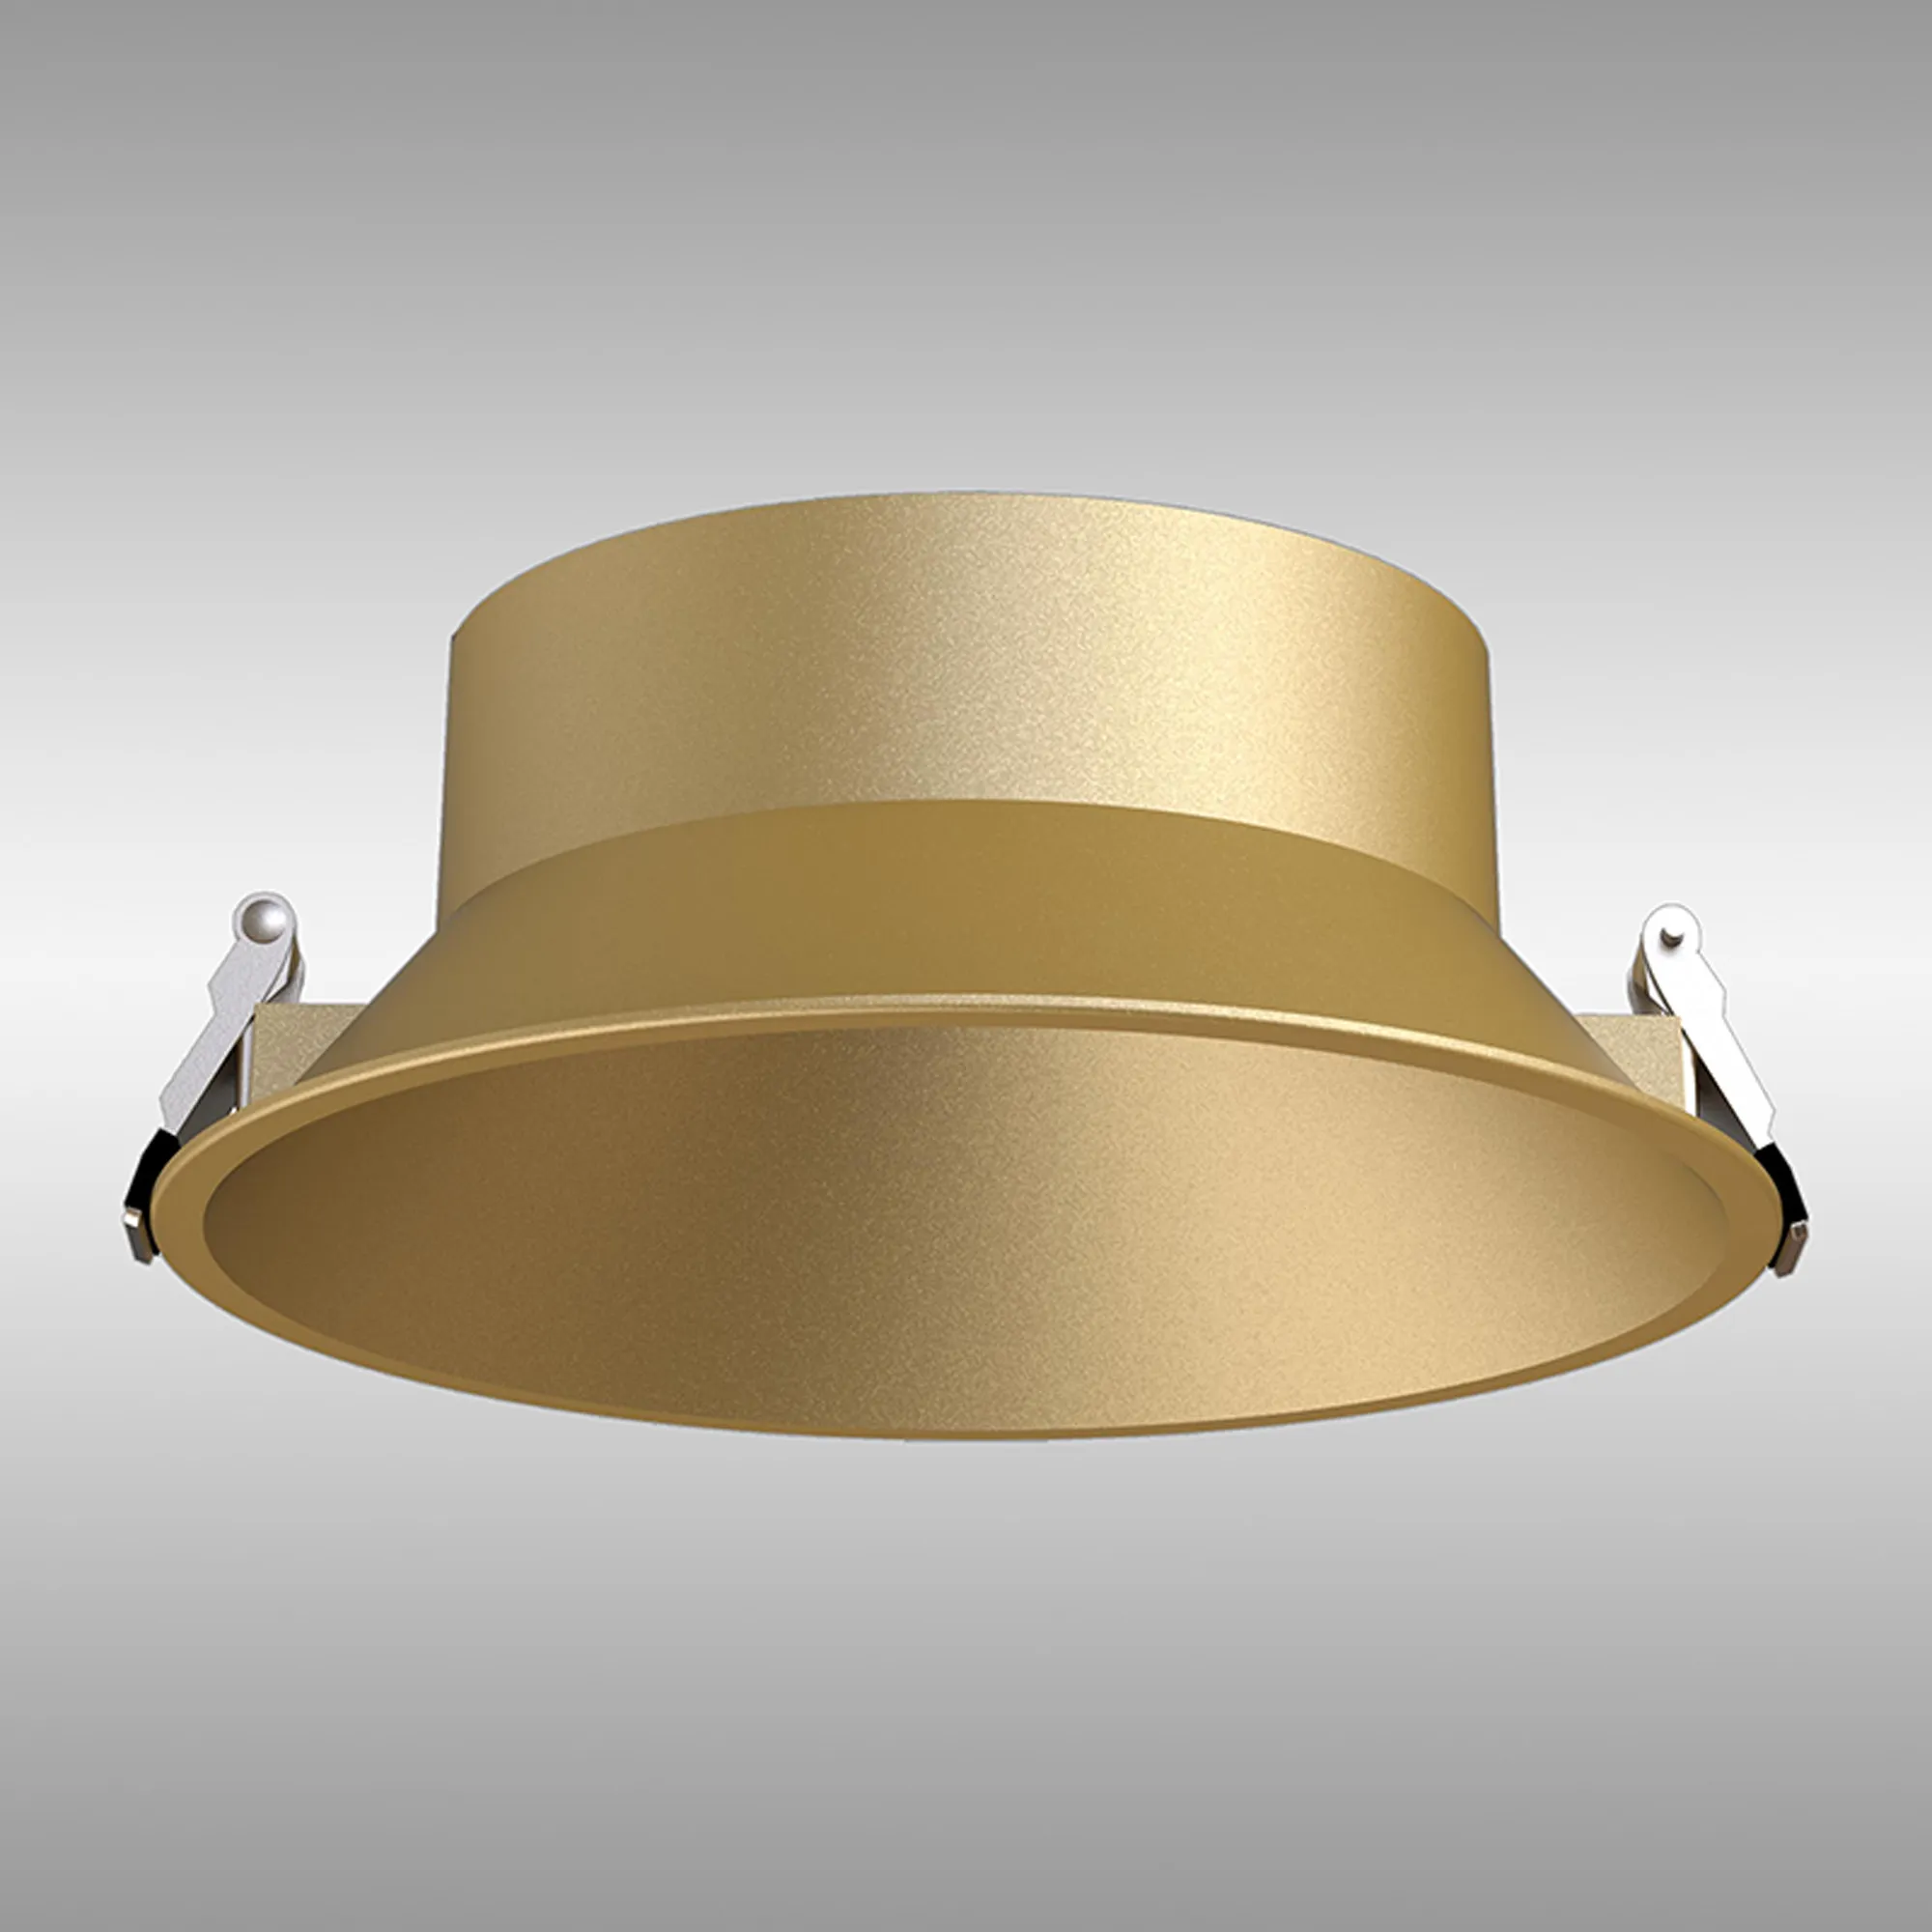 M8809  Sunset 215 x 152mm Recessed Base; Cut Out: 200mm; Gold